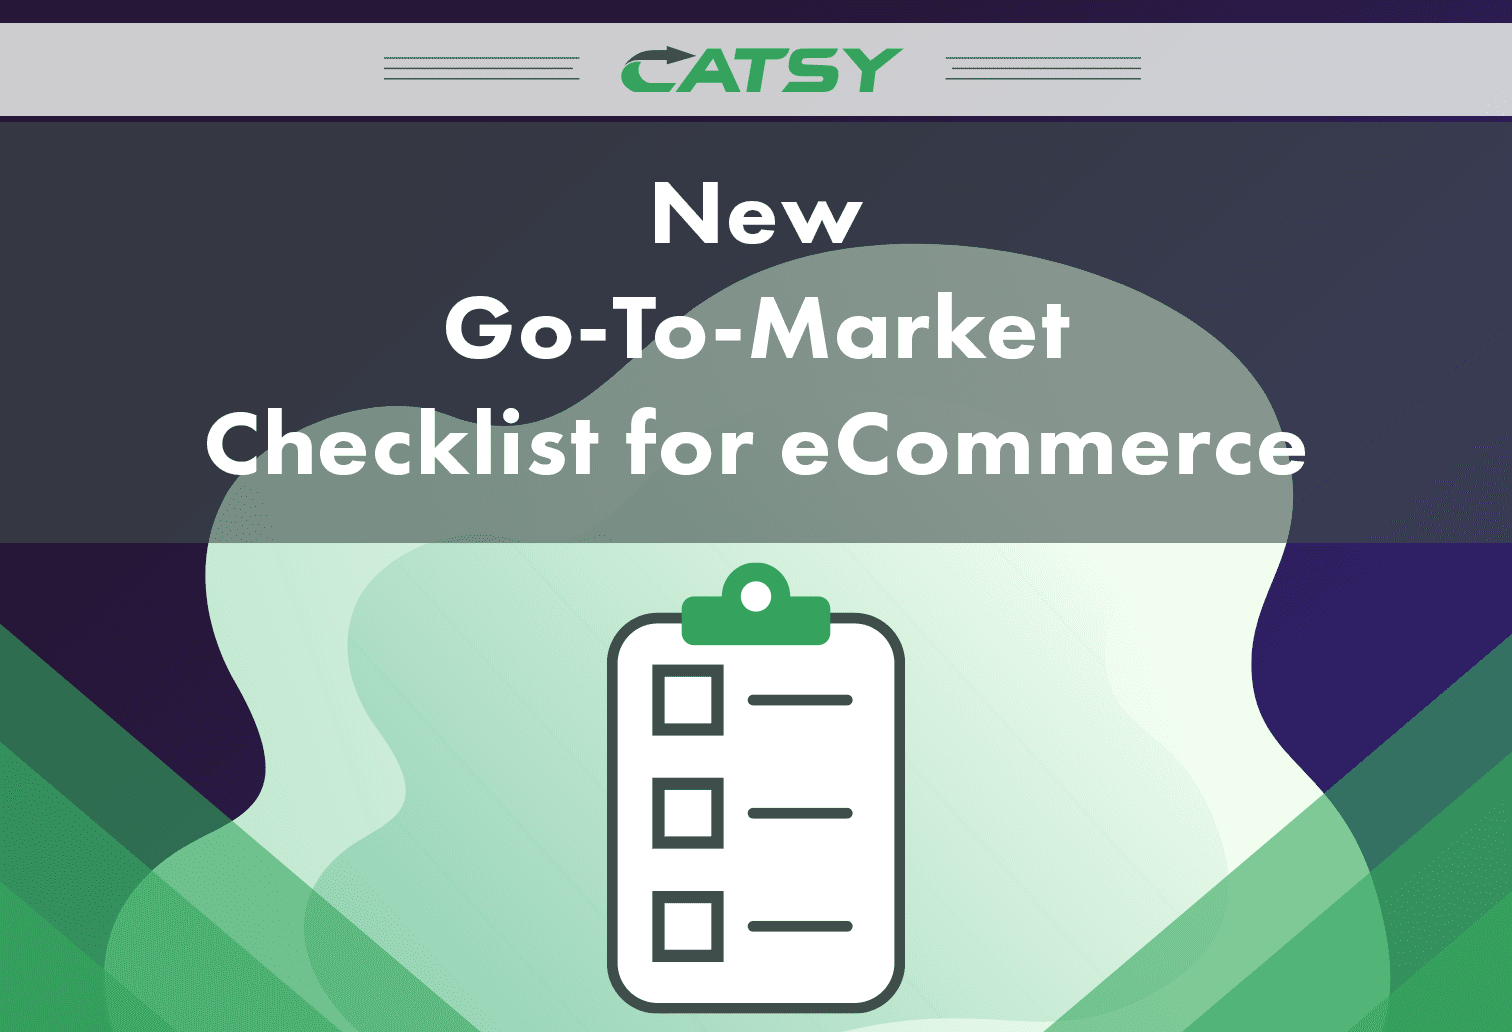 New Go-To-Market Checklist Template for eCommerce